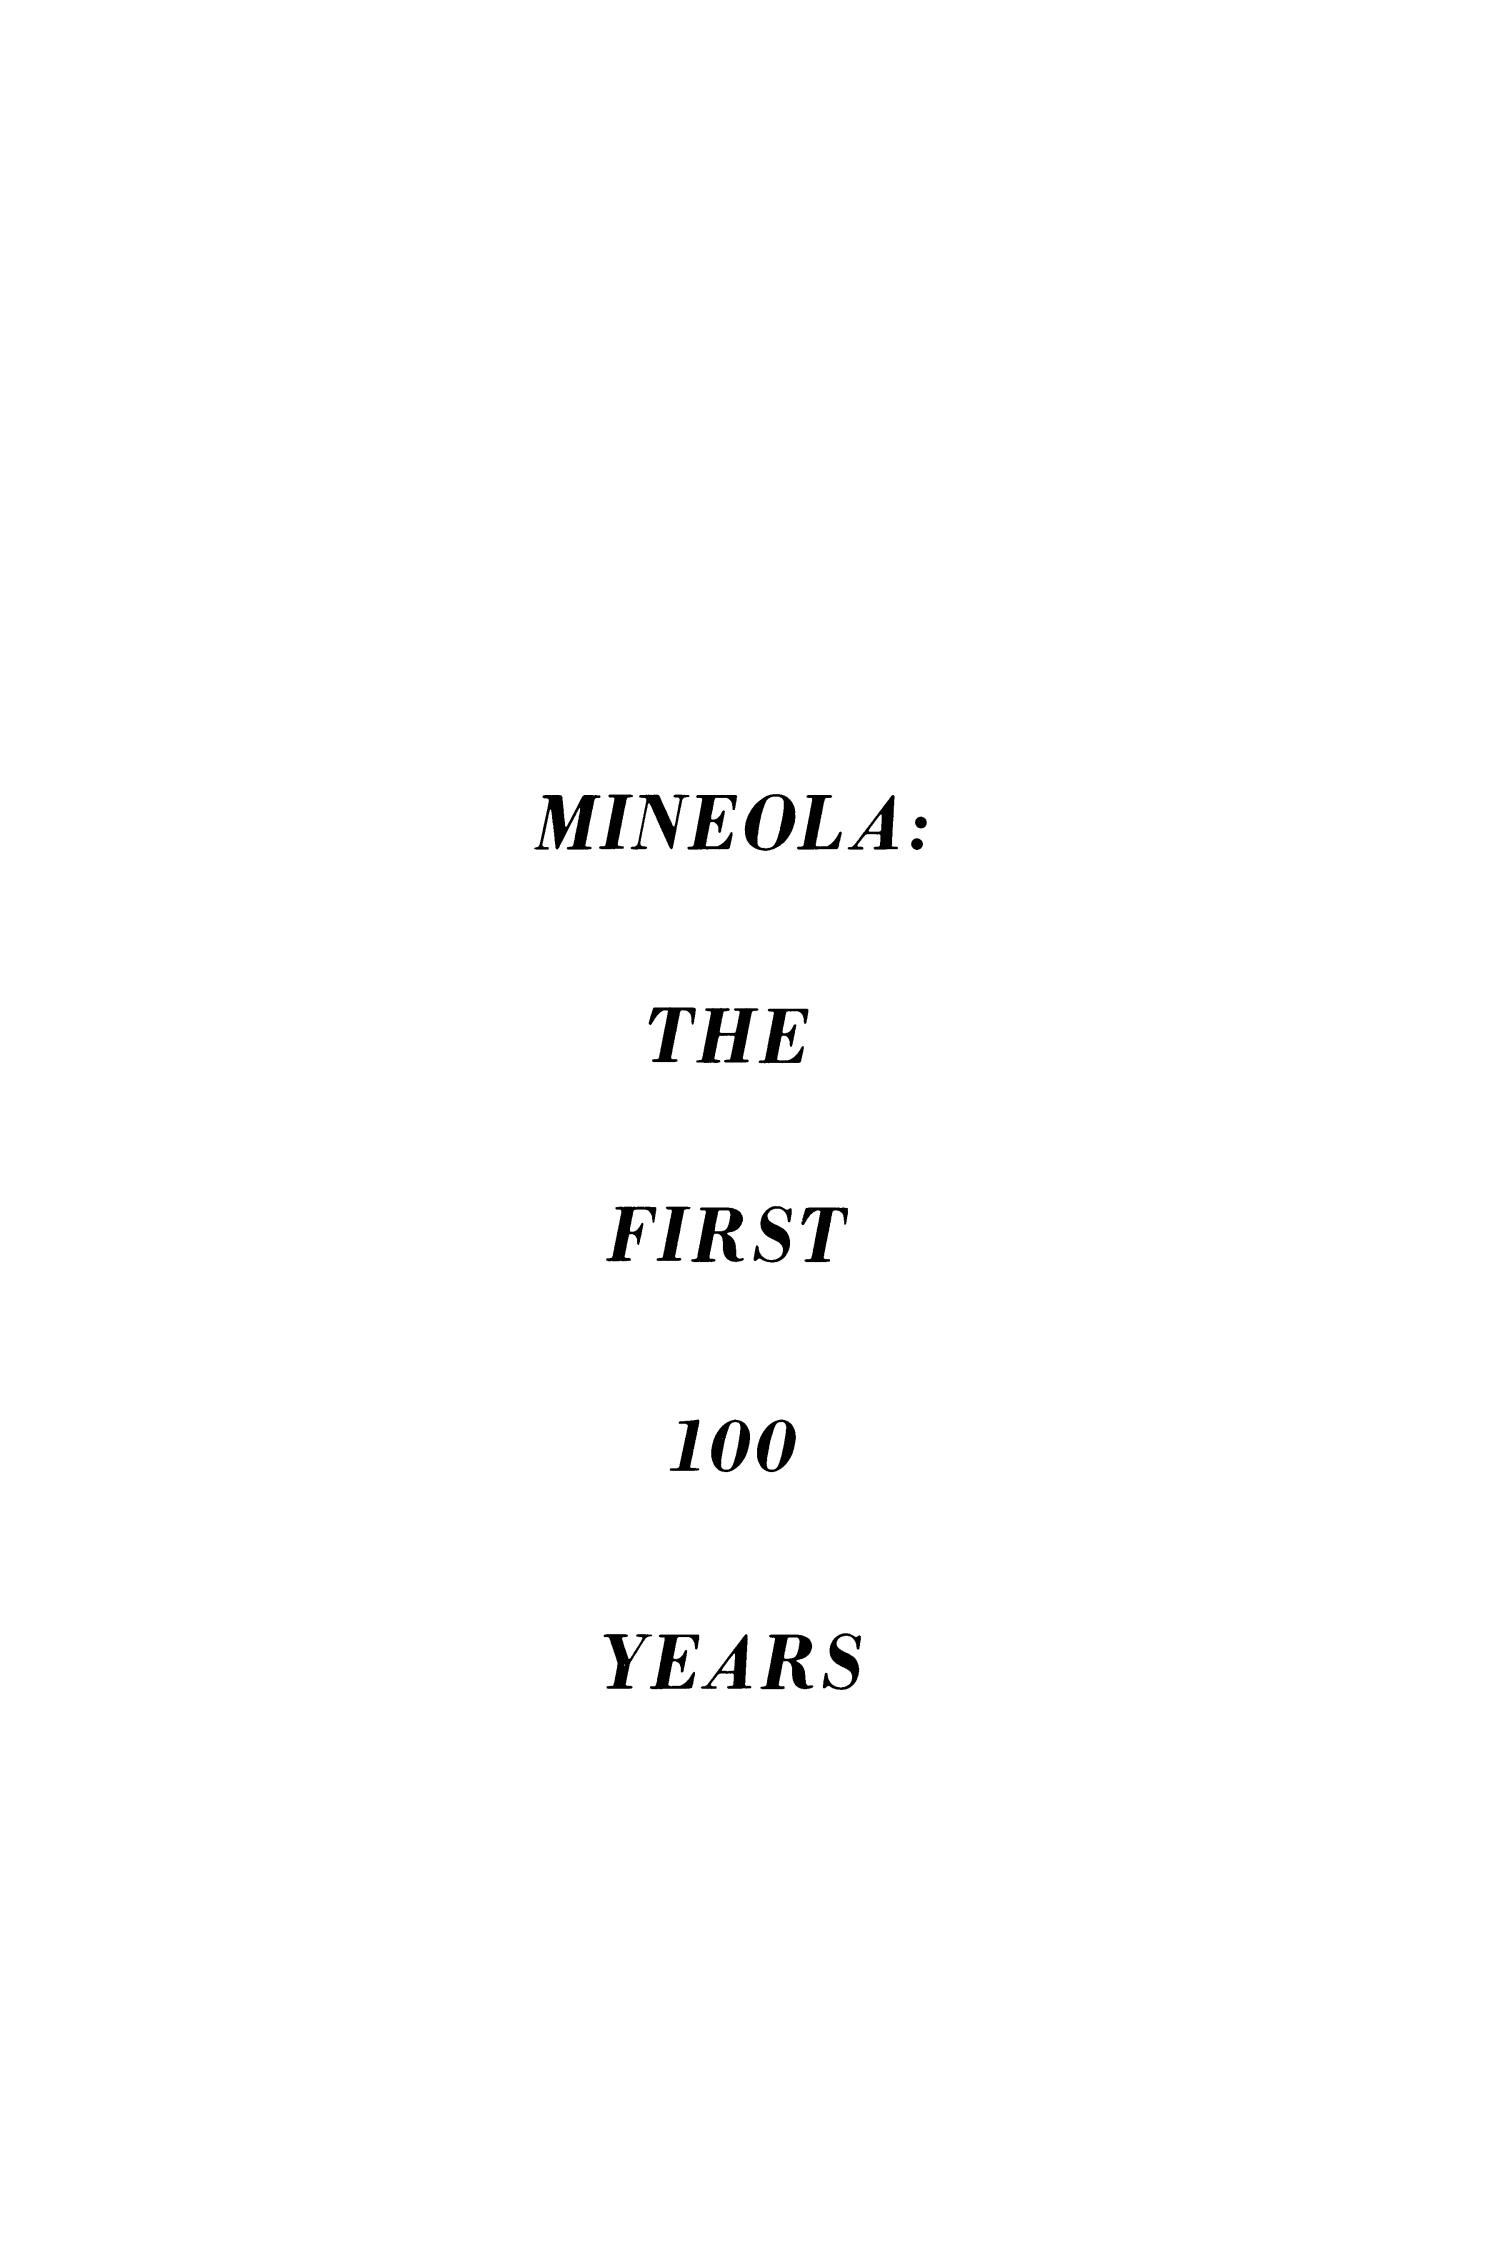 Mineola: the first 100 years
                                                
                                                    1
                                                